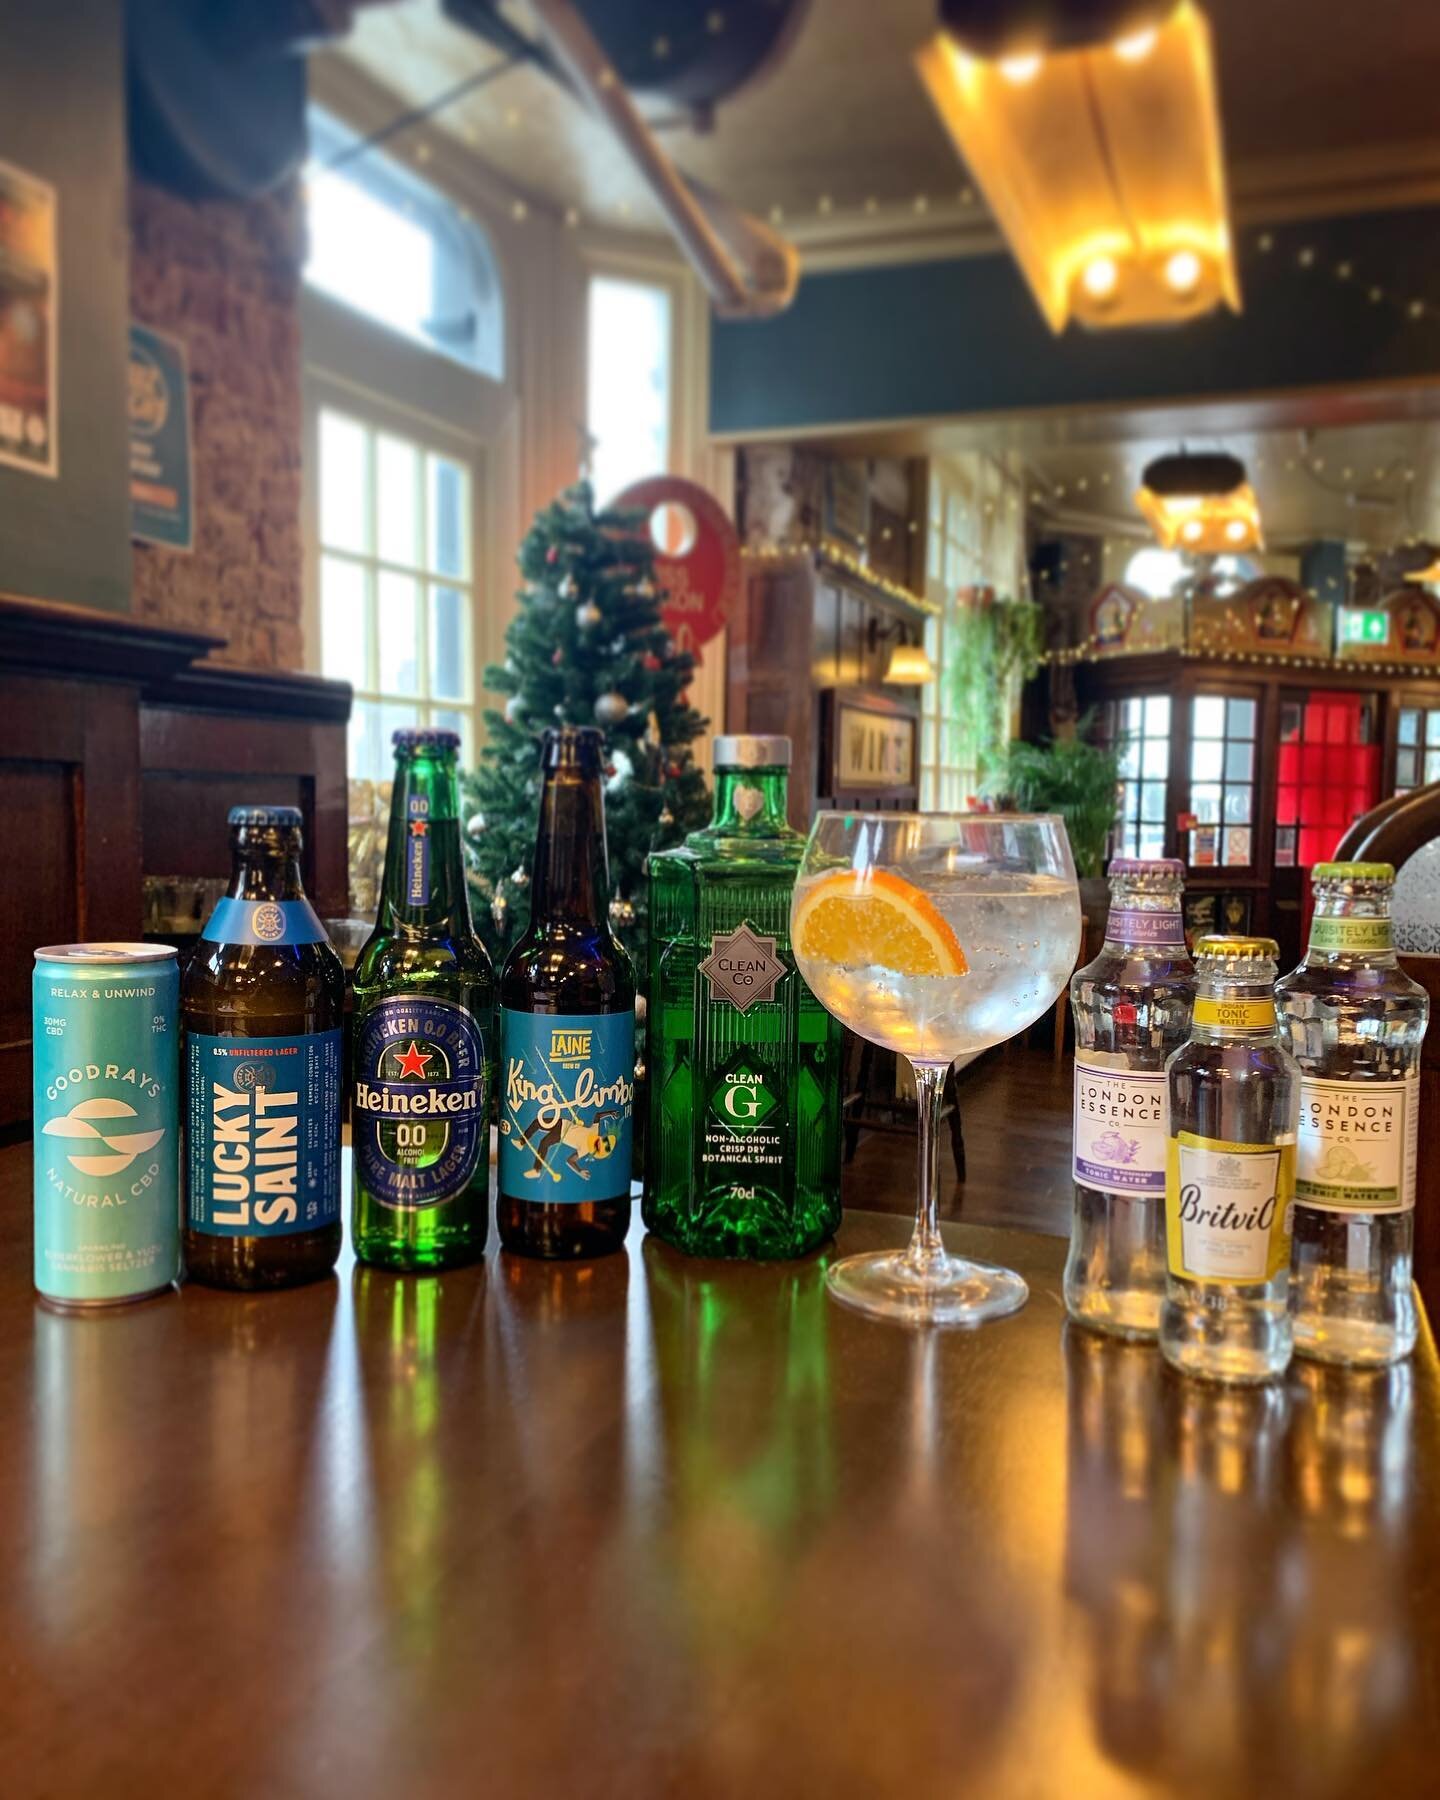 Nursing a post Footie hangover? ⚽️ 

We have a great selection of non-alcohol/low alcohol alternatives to ease you into the week!

#itscominghome #worldcup2022 #mondaymood #mondayblues #hangovercure #lowalcohol @lainepubco @lainebrewco #theislingword